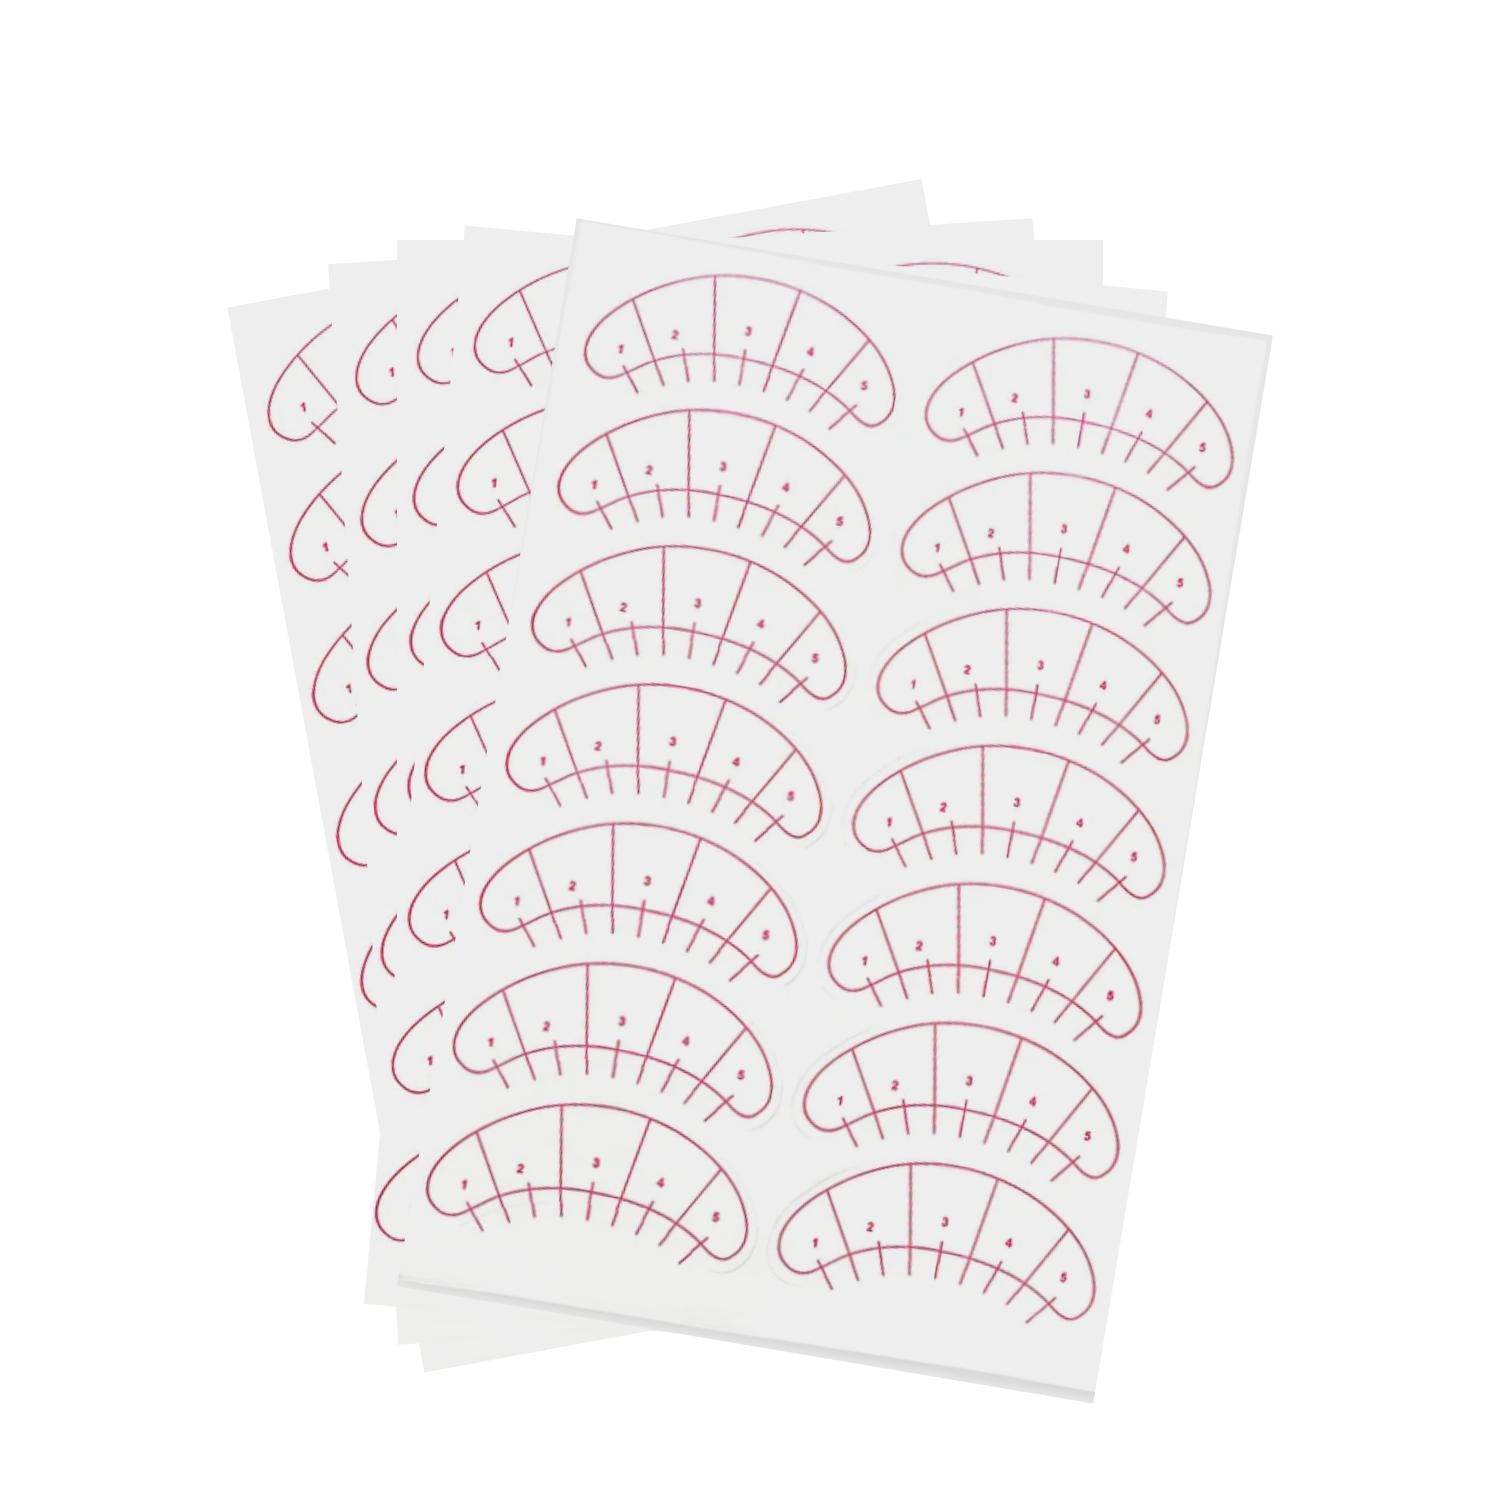 Lash Mapping Stickers for Eyelash Extension Training